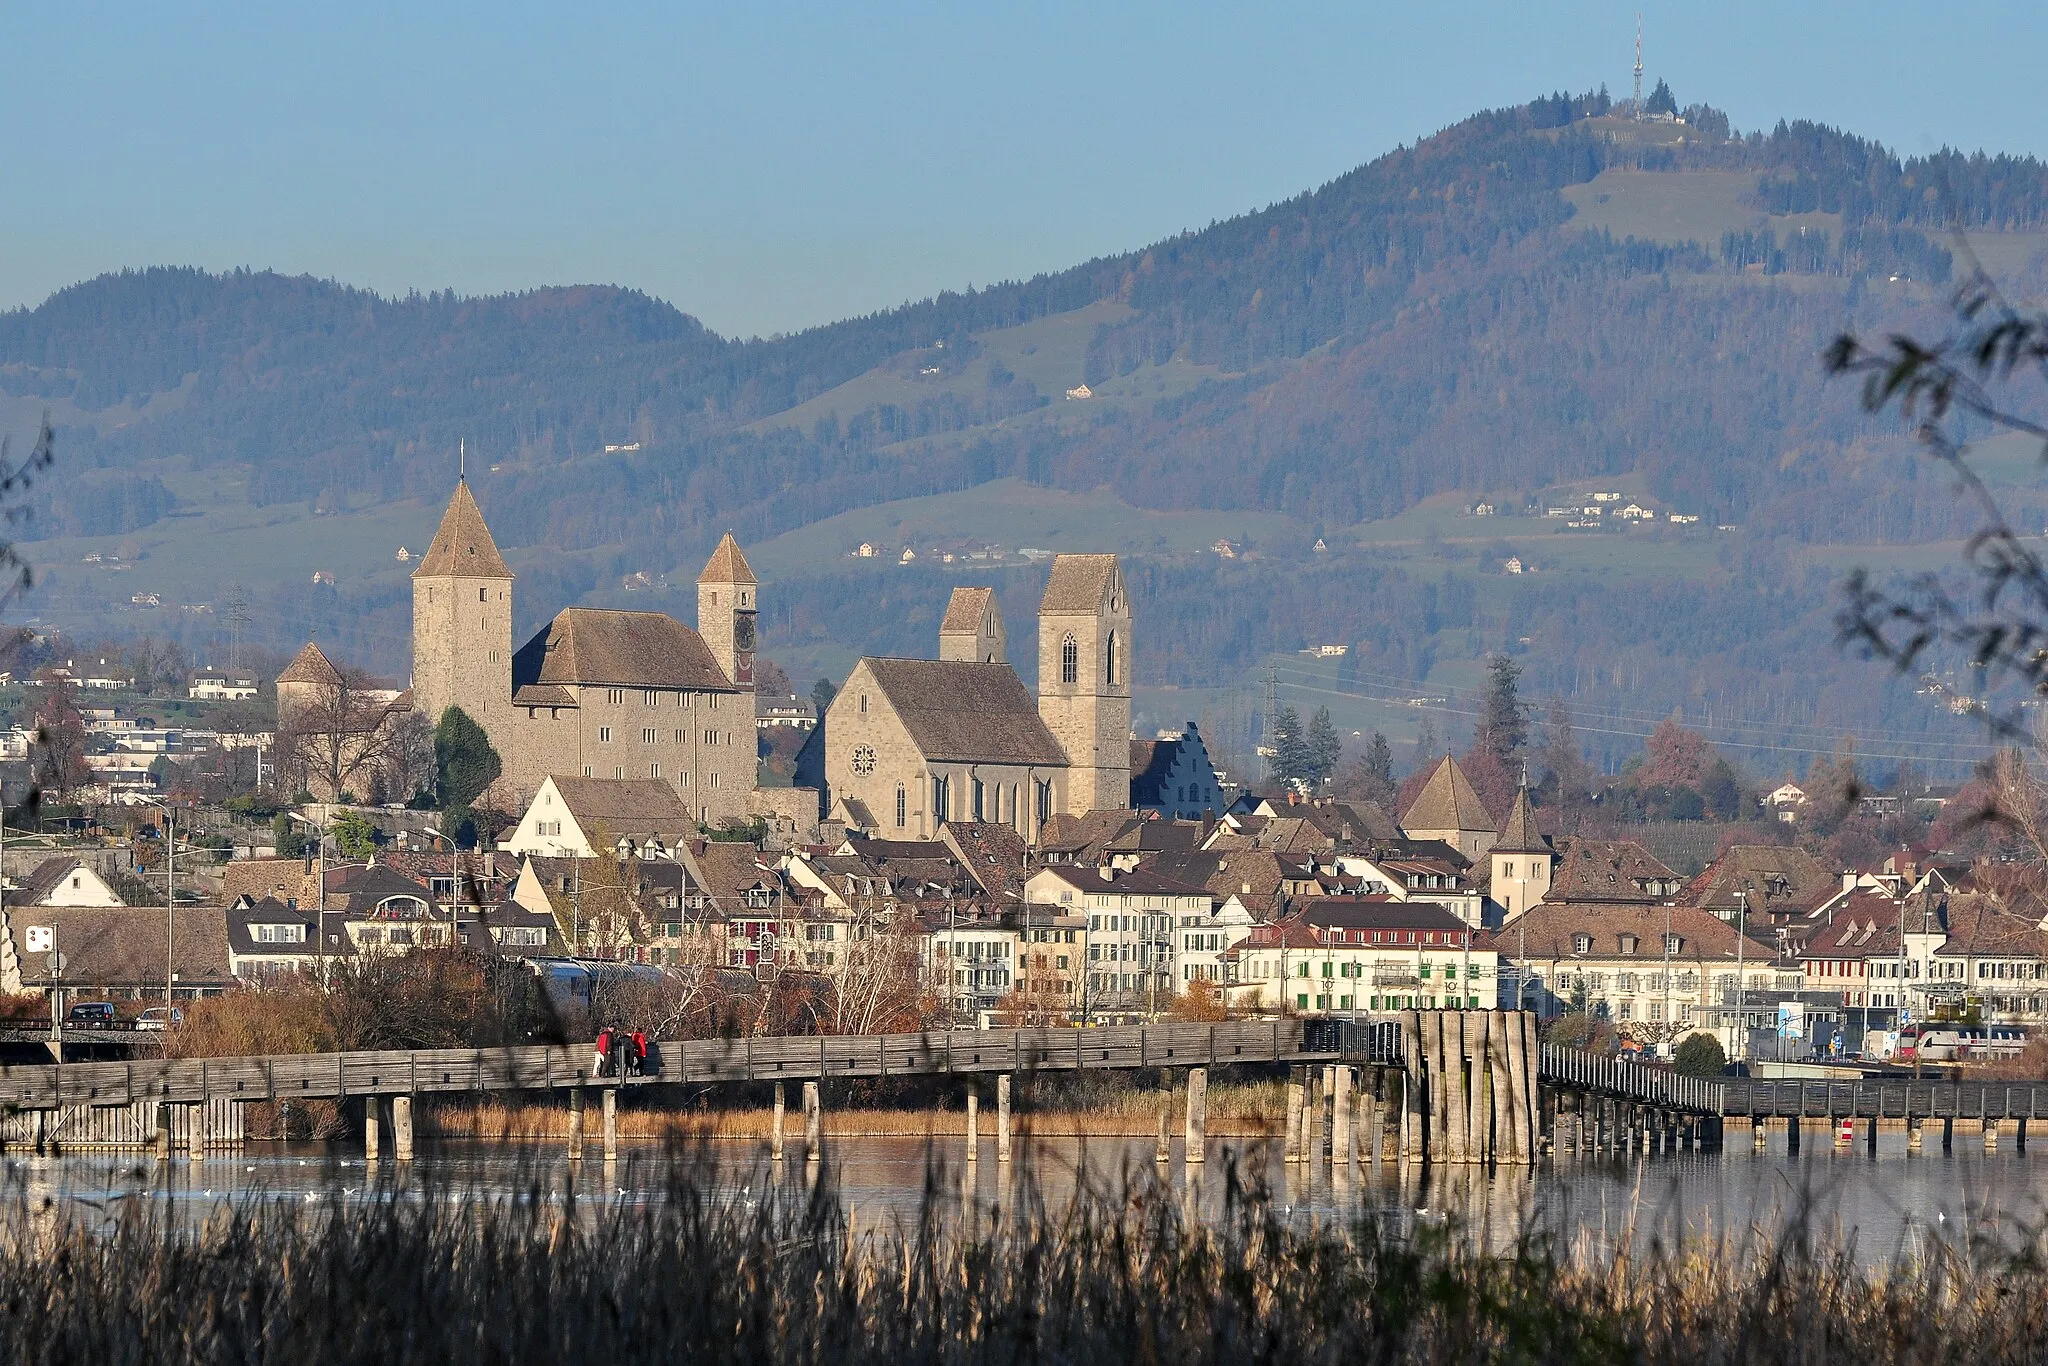 Photo showing: Rapperswil (Switzerland), as seen from Holzbrücke between Rapperswil and Hurden, crossing Obersee (upper Lake Zurich), Seedamm to the left, Bachtel mountain in the background.